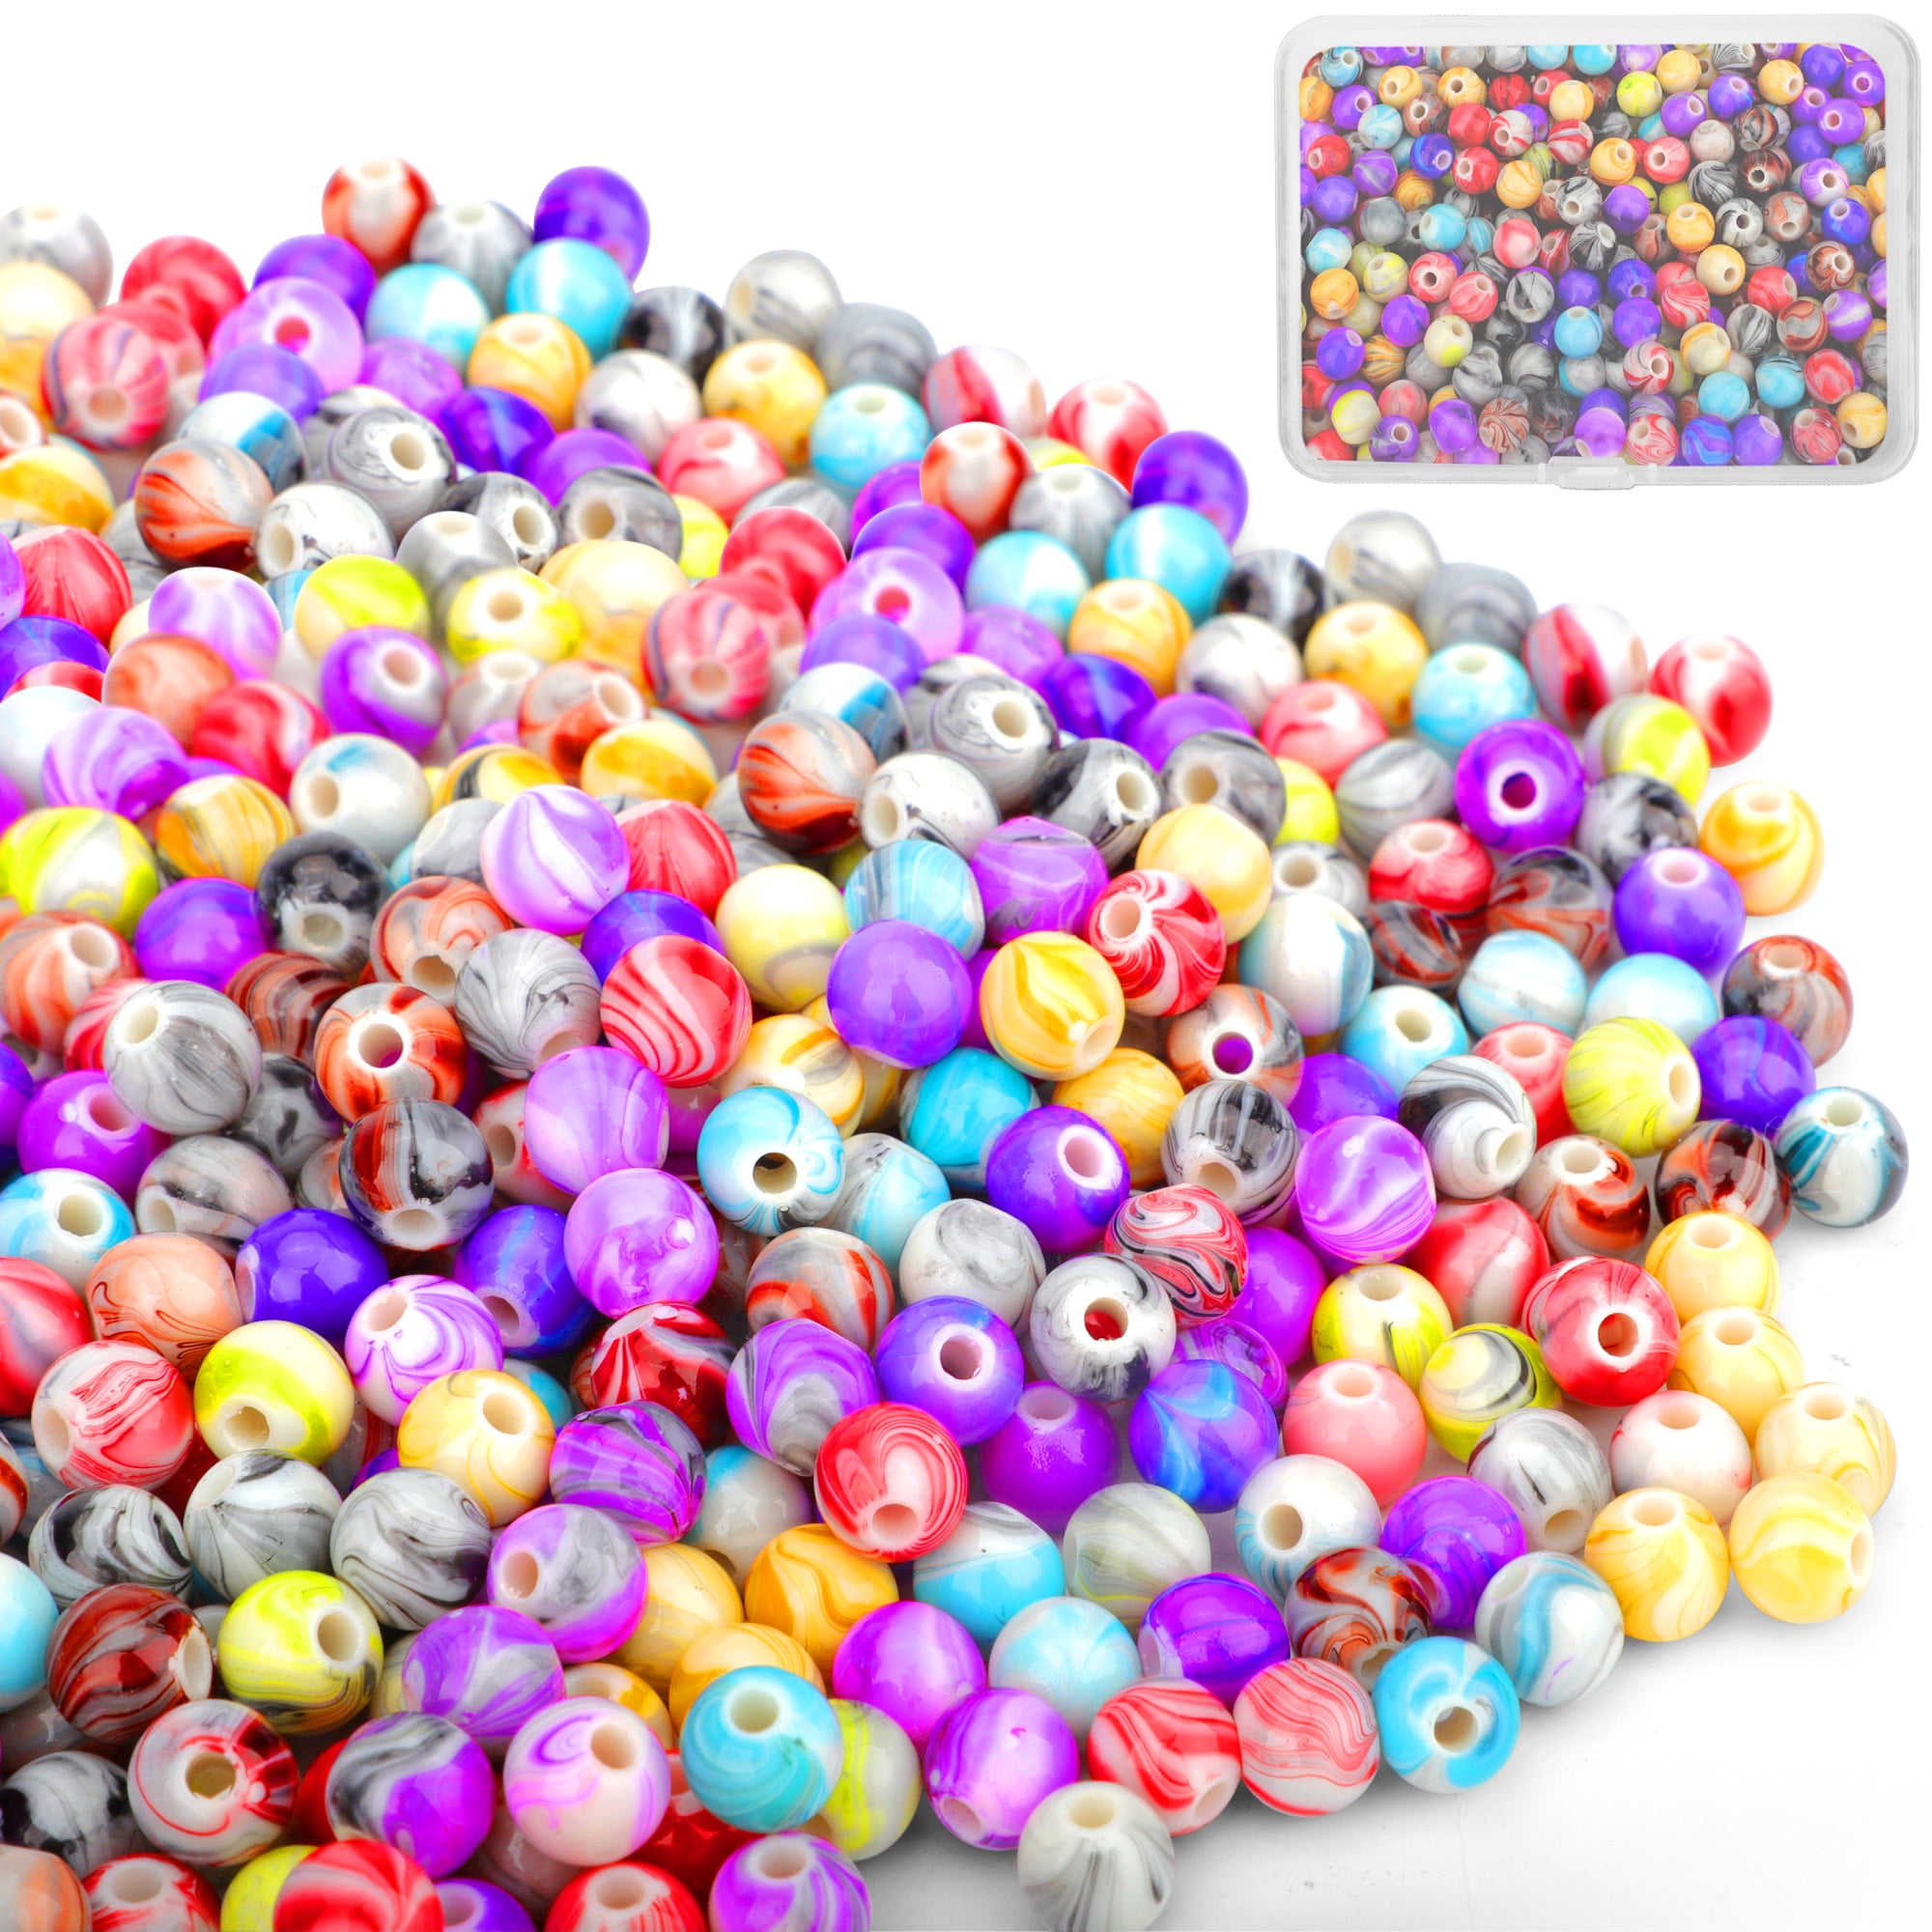 10 Pcs/lot Acrylic Color Plated Solid loose Beads M Bean/cow Shape Diy  Jewelry Beads For Making Jewelry Diy Bracelet Accessories